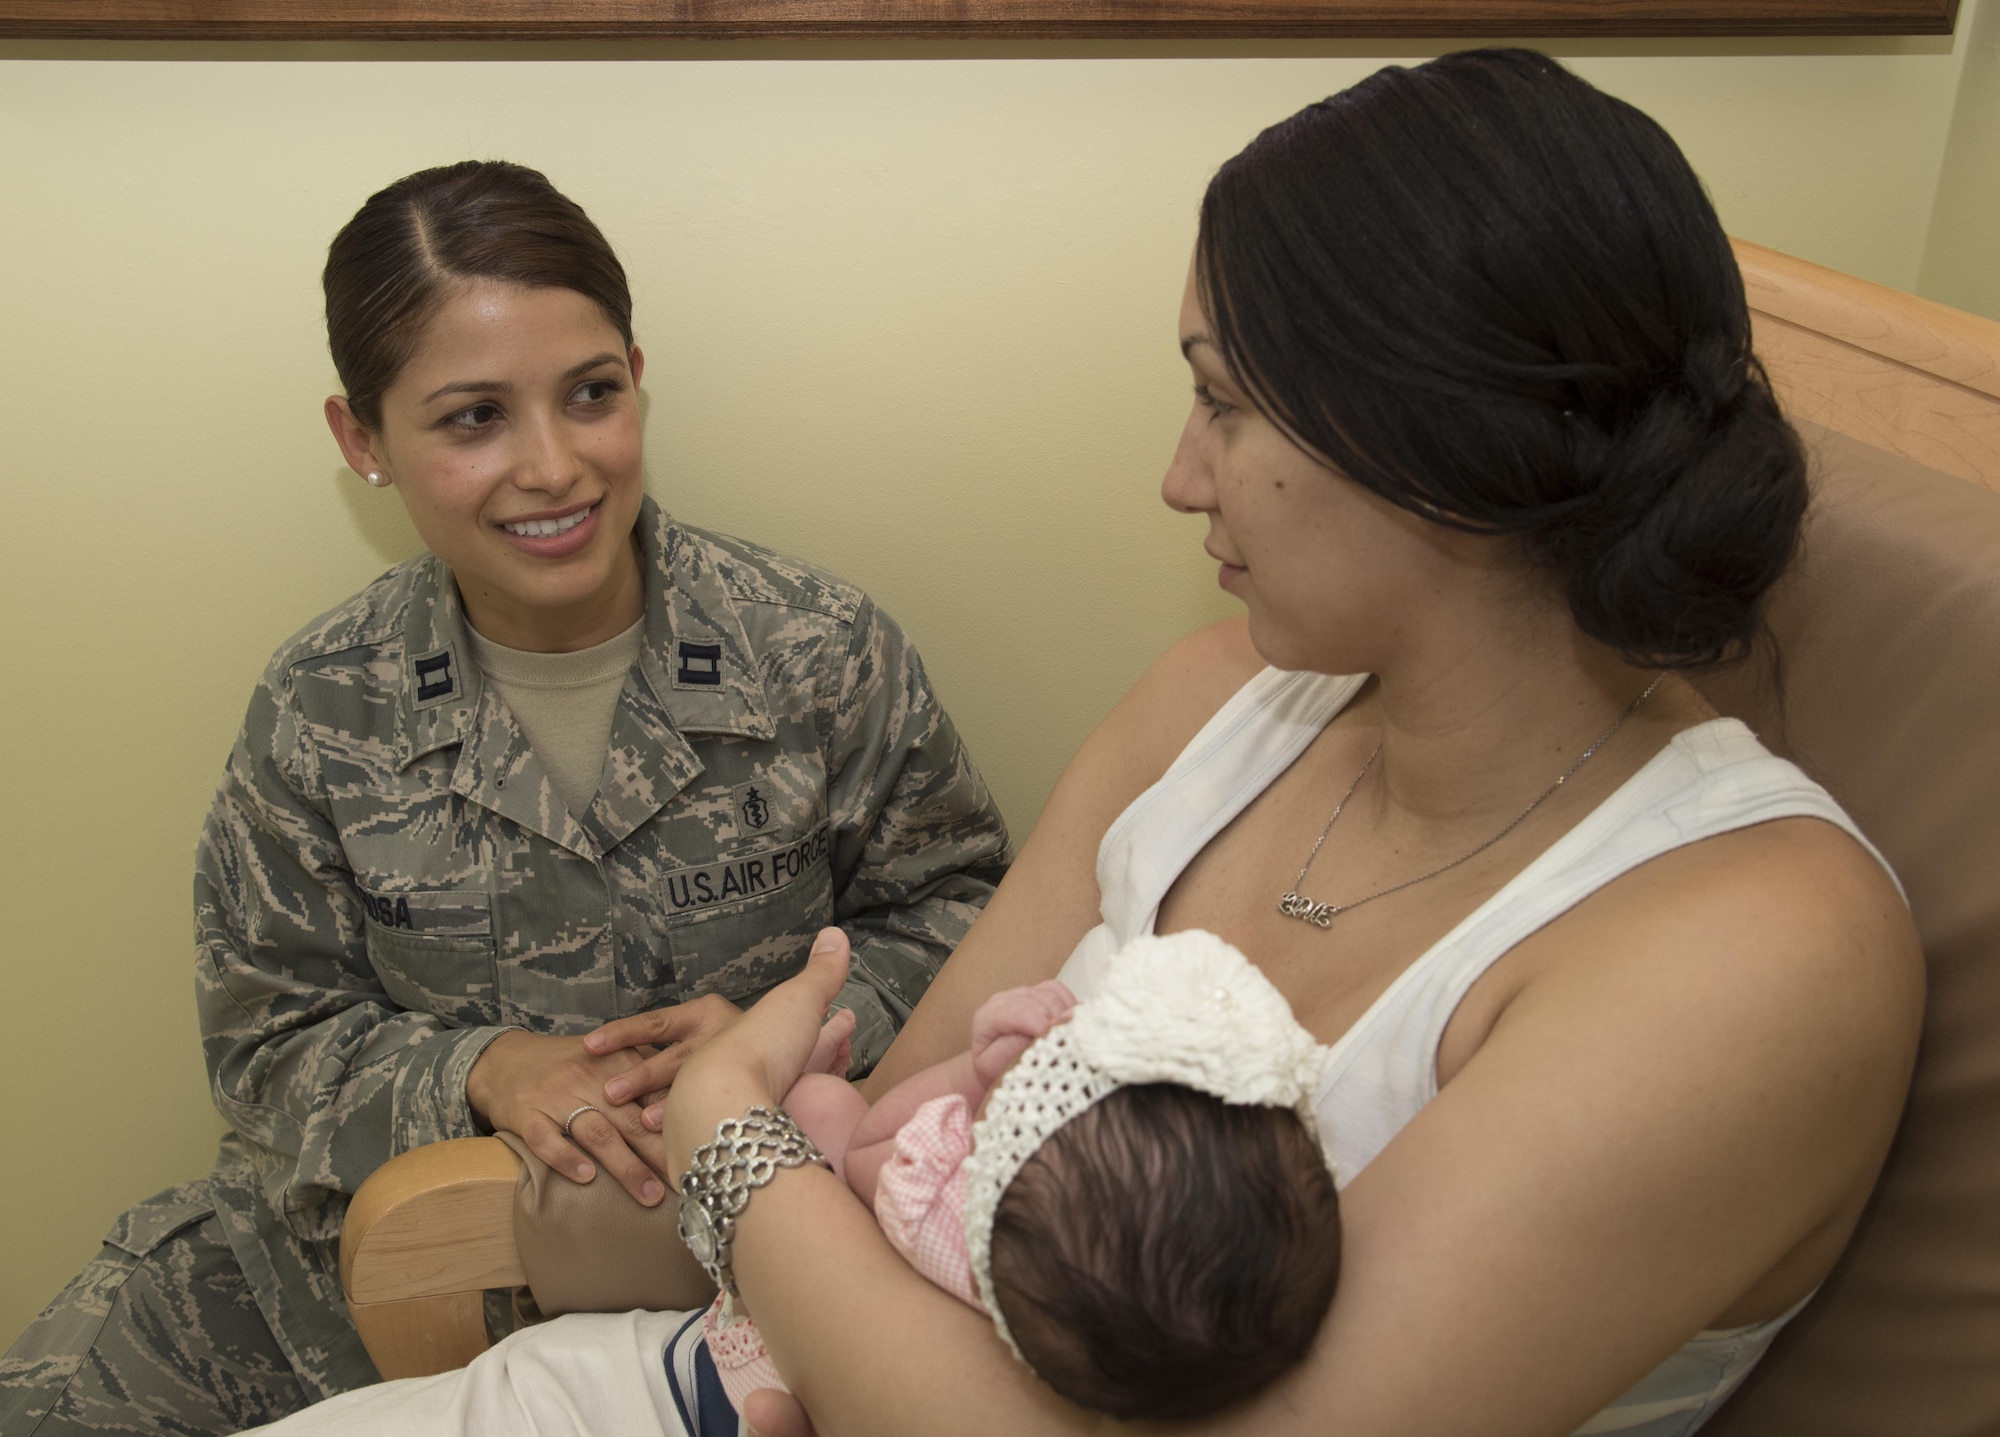 U.S. Air Force Capt. Paola Rosa, left, a 35th Surgical Operations Squadron obstetrics and gynecologist physician, talks with Airman 1st Class Monet Murdock, right, a 35th Logistics Readiness Squadron customer service technician, and her daughter Aaliyah Murdock, center, about her delivery at Misawa Air Base, Japan, June 29, 2017. Along with deliveries, the OB/GYN physicians assist with women’s overall health and bodily changes. (U.S. Air Force photo by Airman 1st Class Sadie Colbert)